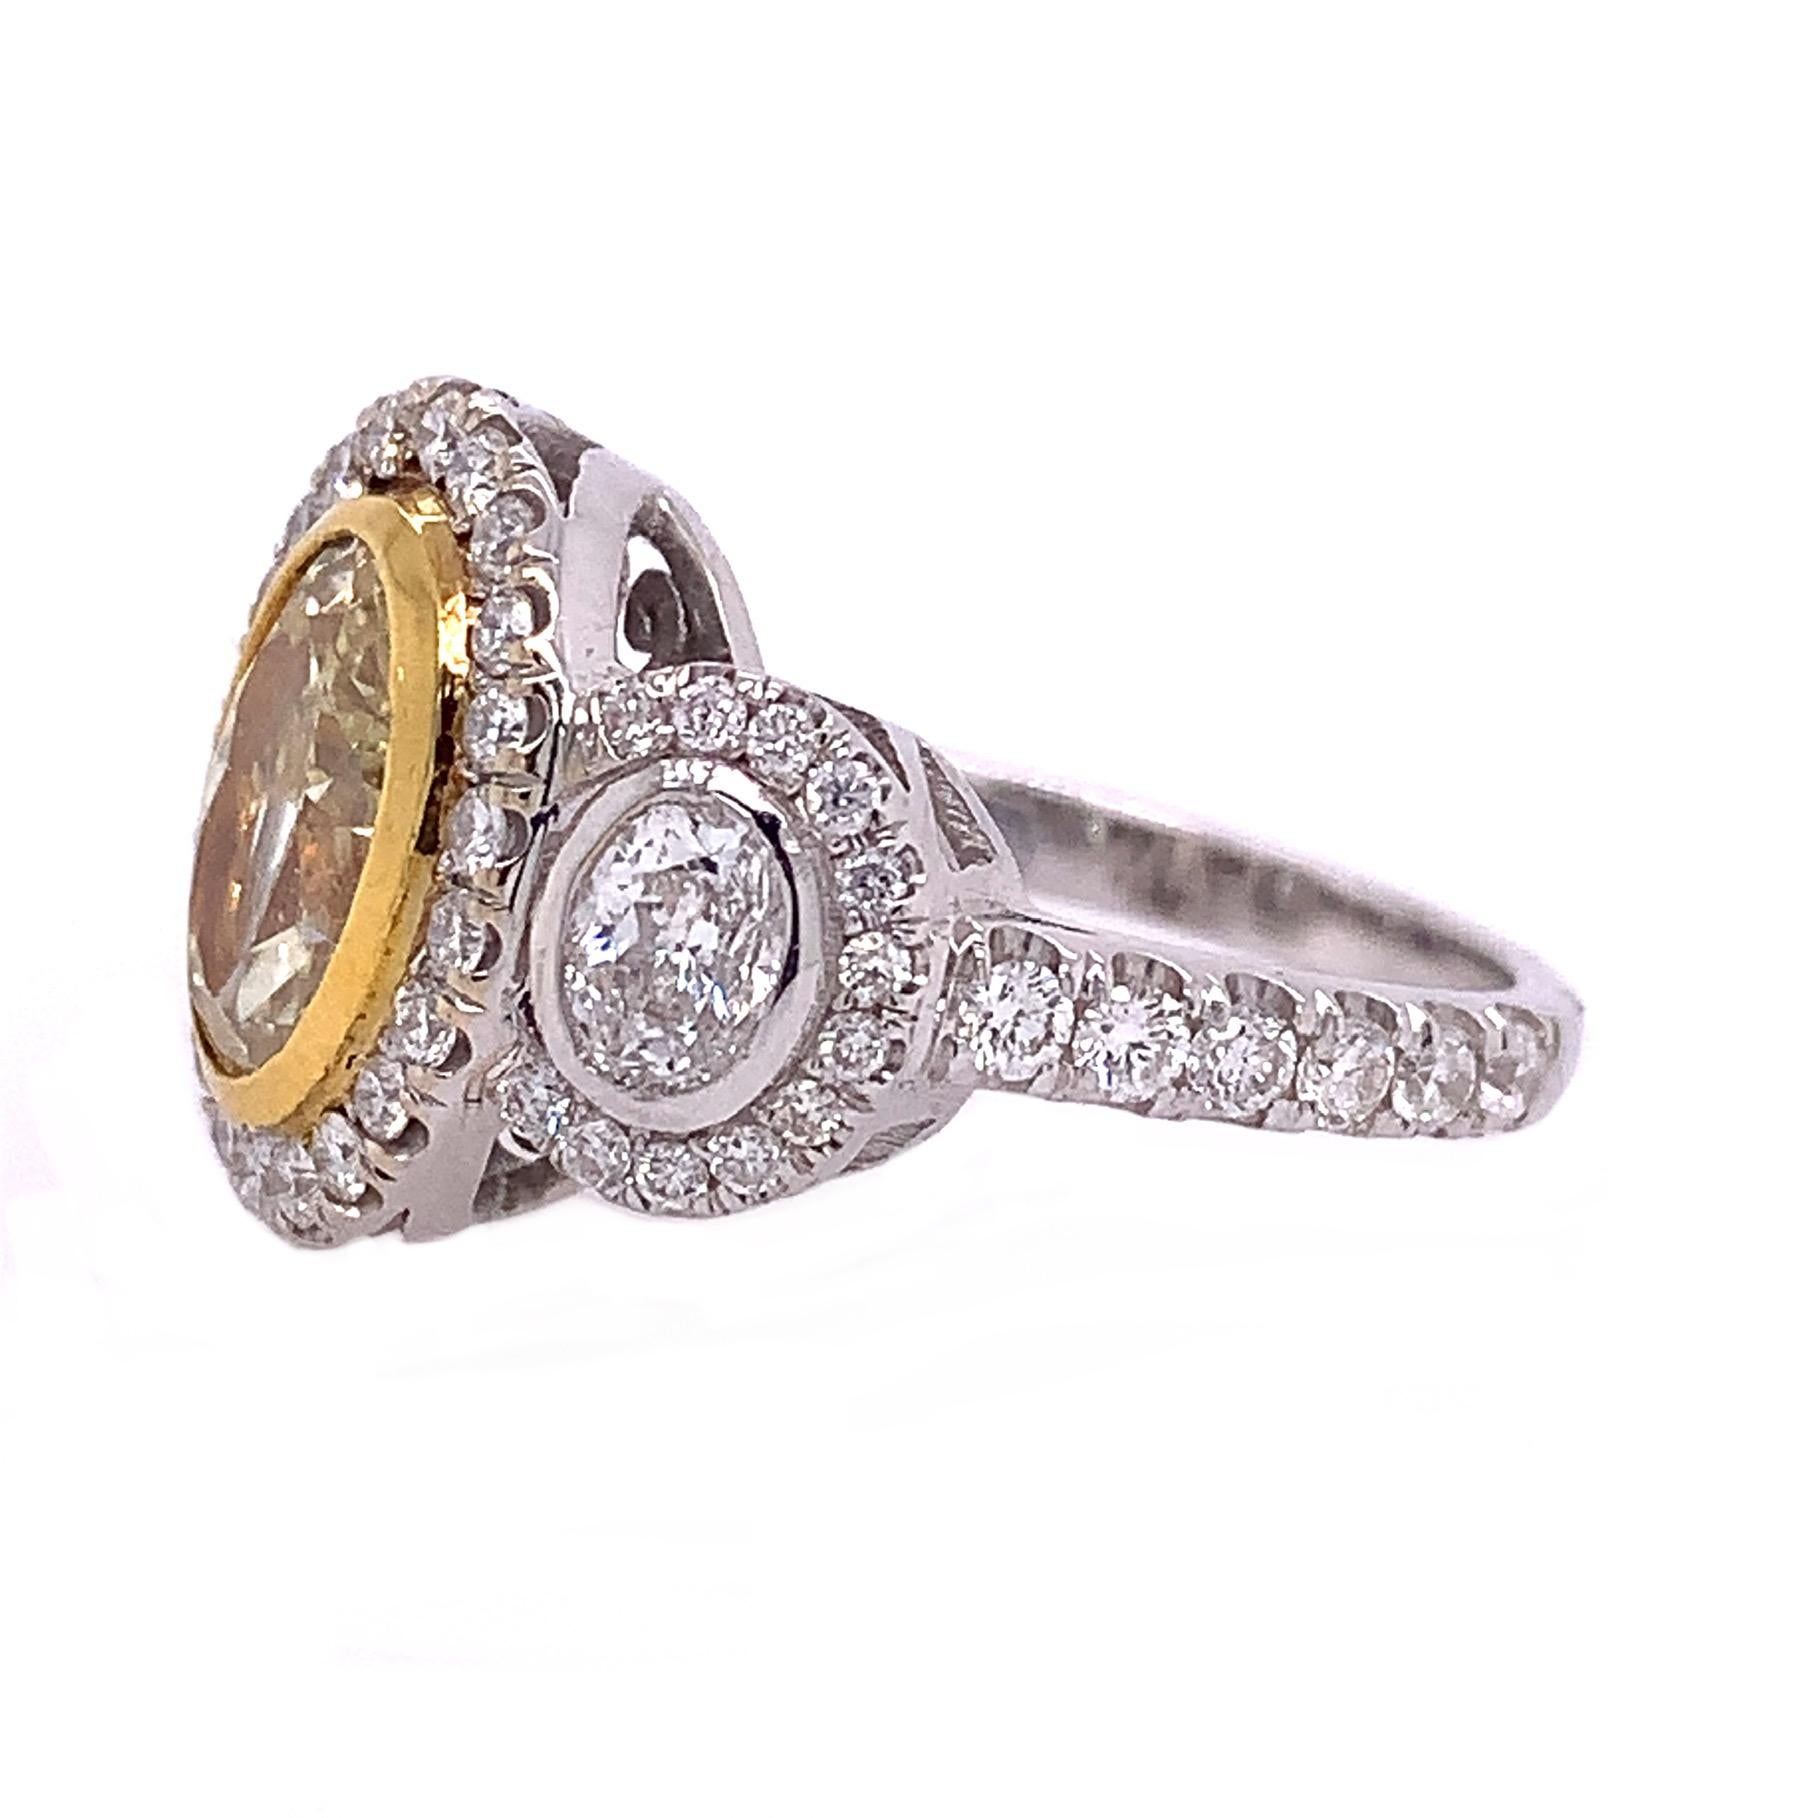 18K White and Yellow Gold
Fancy Diamond: 1.71ct total weight.
Diamond: 1.83ct total weight.